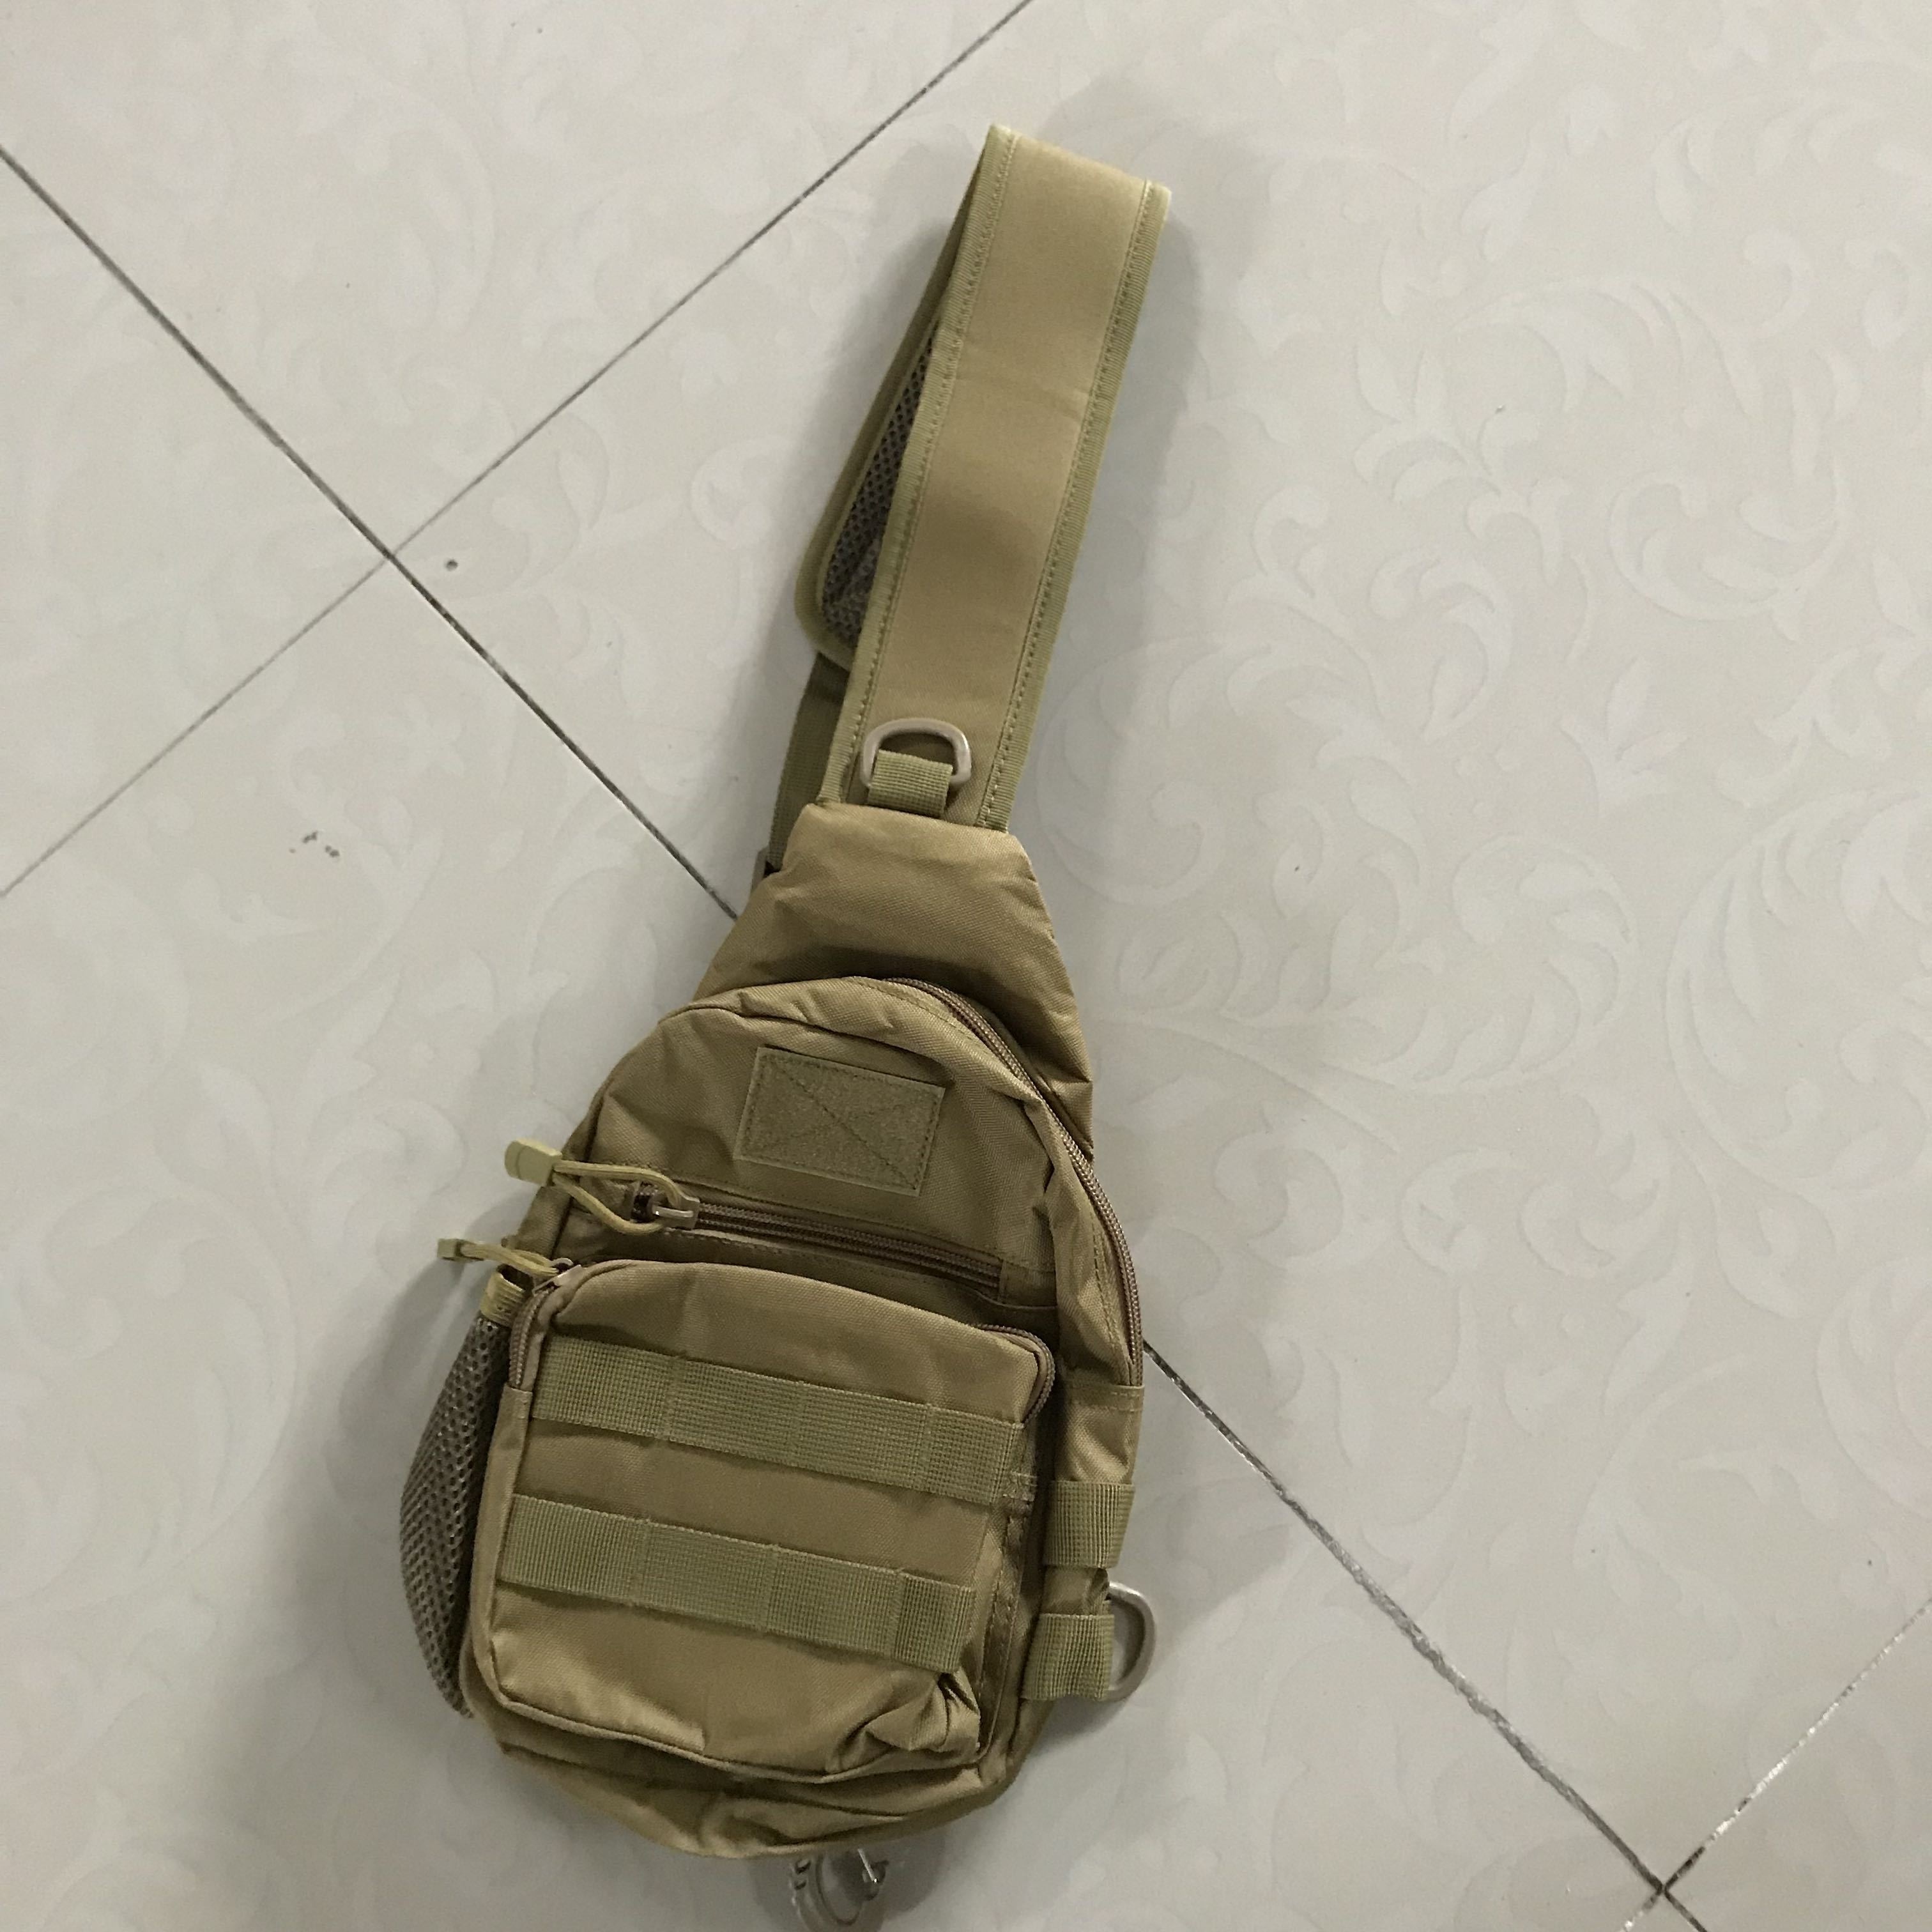 Military Tactical Shoulder Bag For Men Ideal For Hiking, Hunting, Camping,  Fishing, And Trekking Molle Army Chest Sling With Nylon Material From  Vanilla12, $18.53